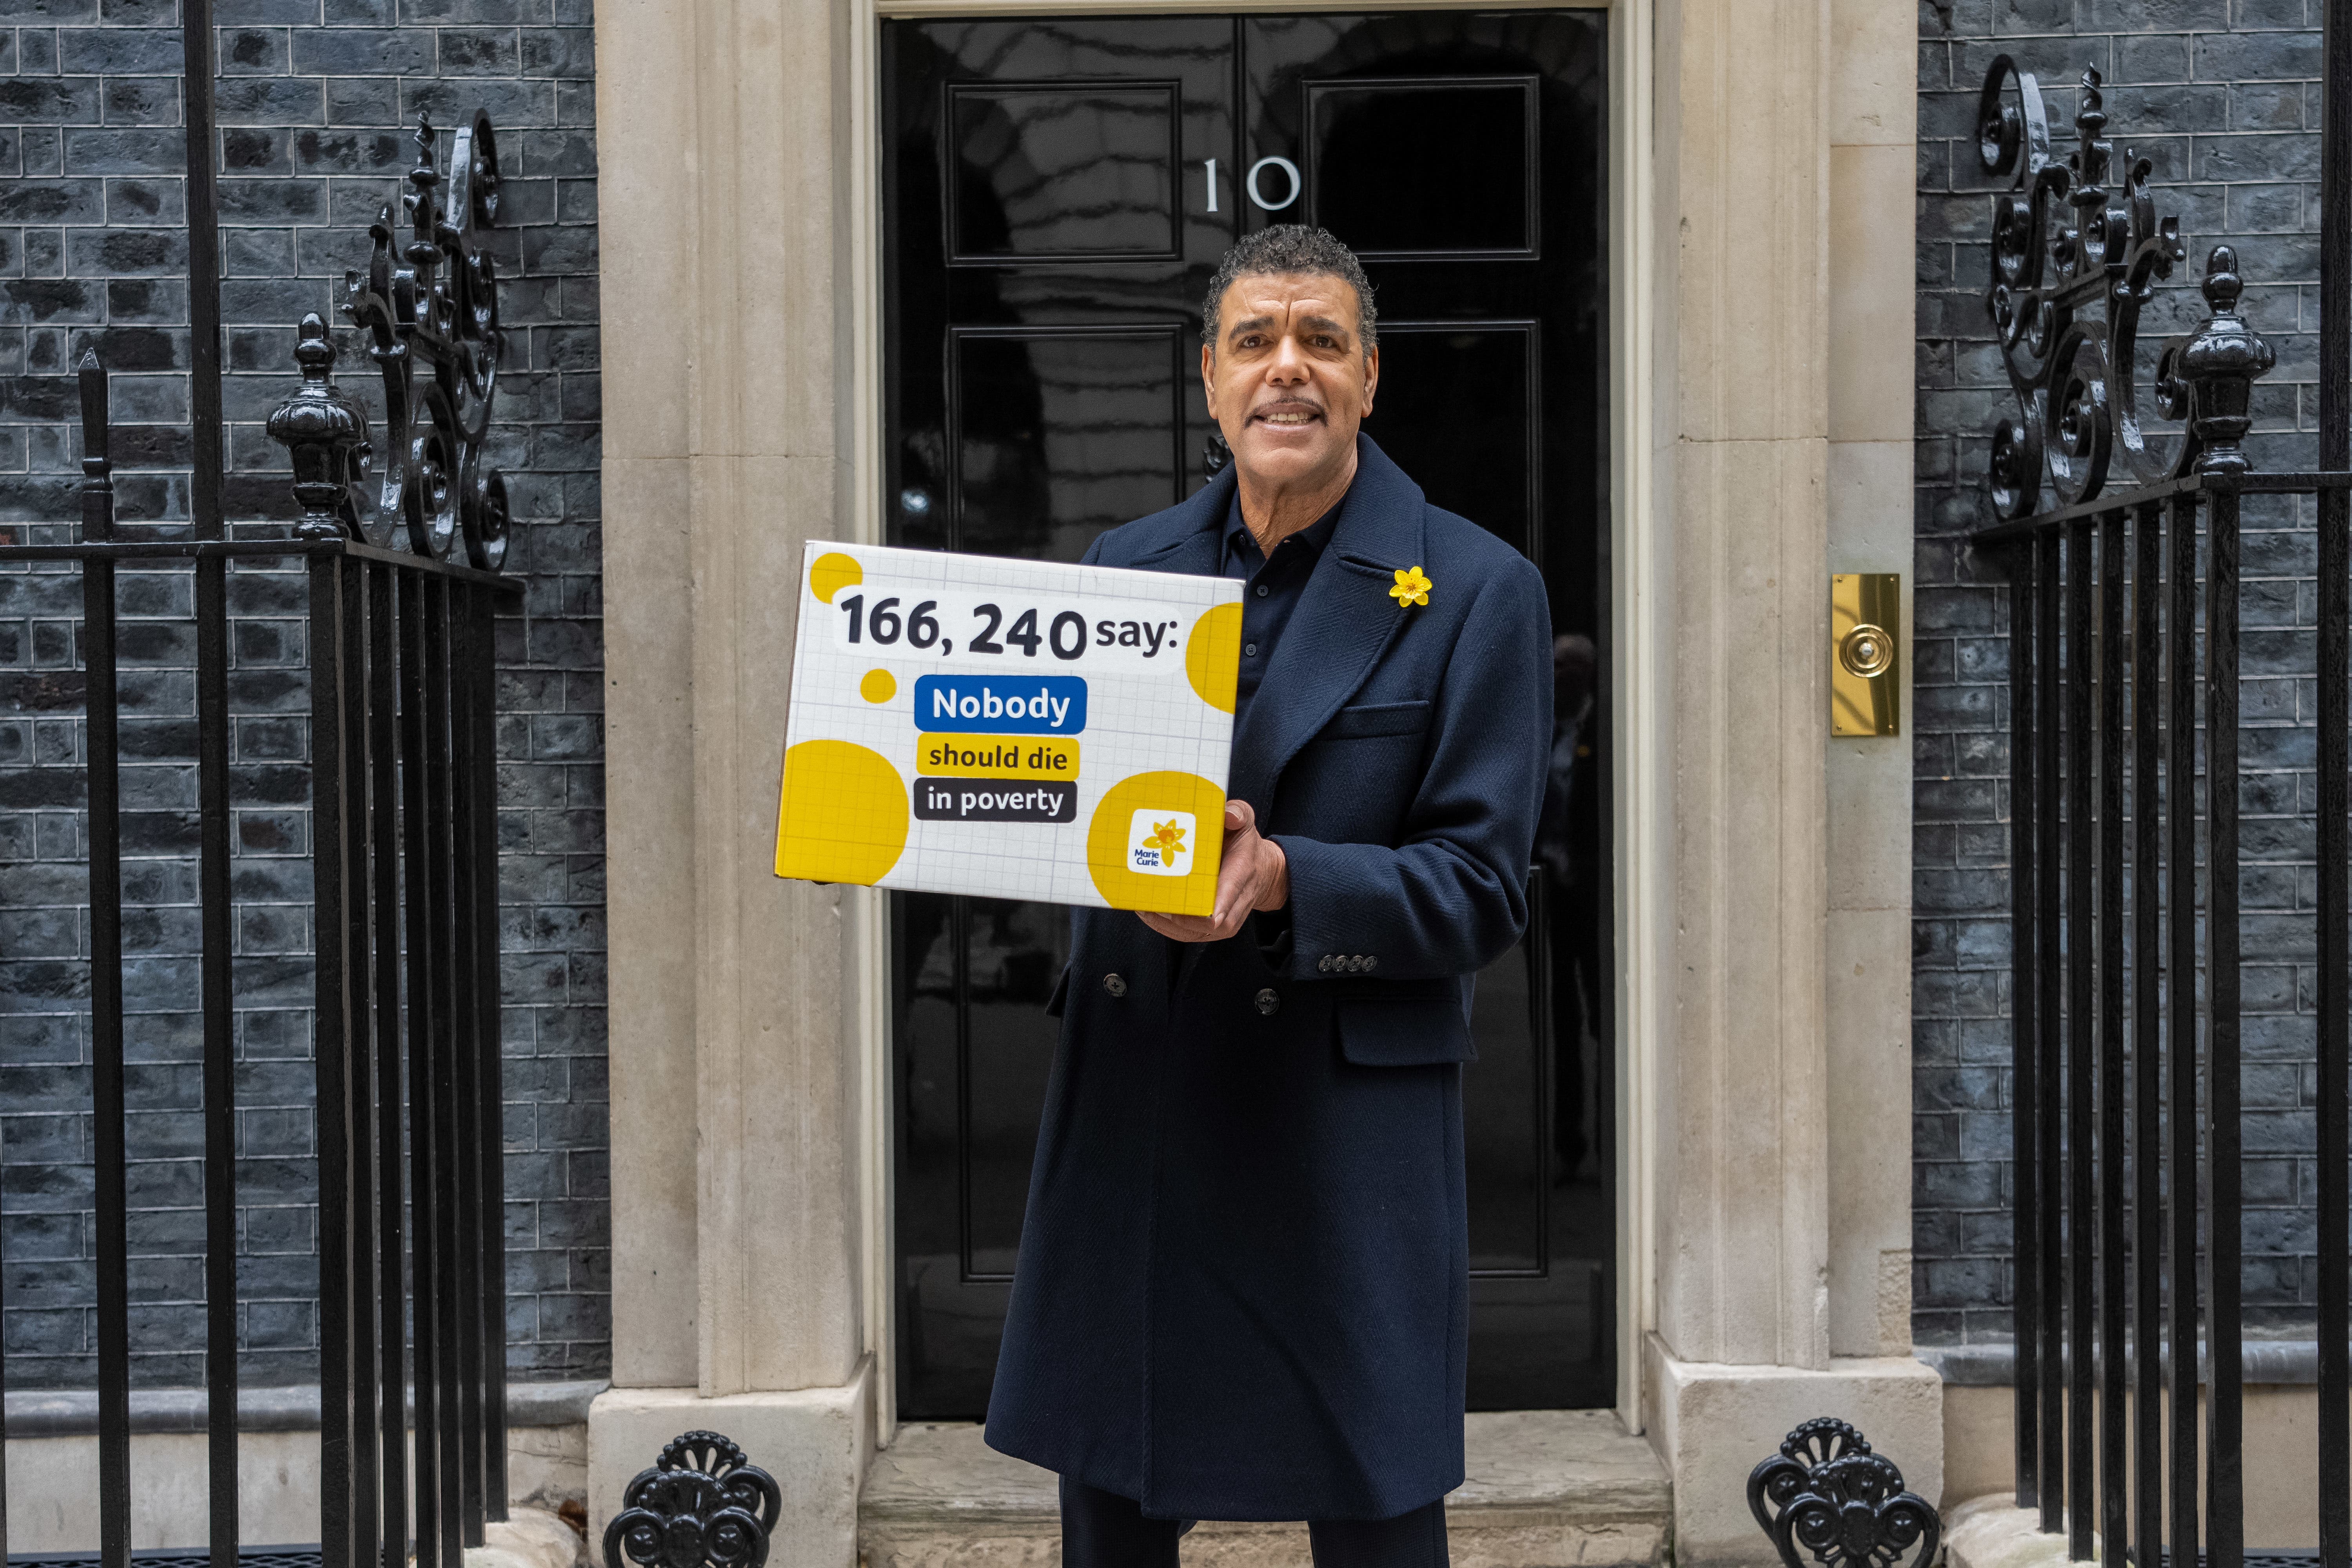 TV presenter and football pundit Chris Kamara, pictured, delivering a petition to Downing Street. (Jeff Moore/PA)